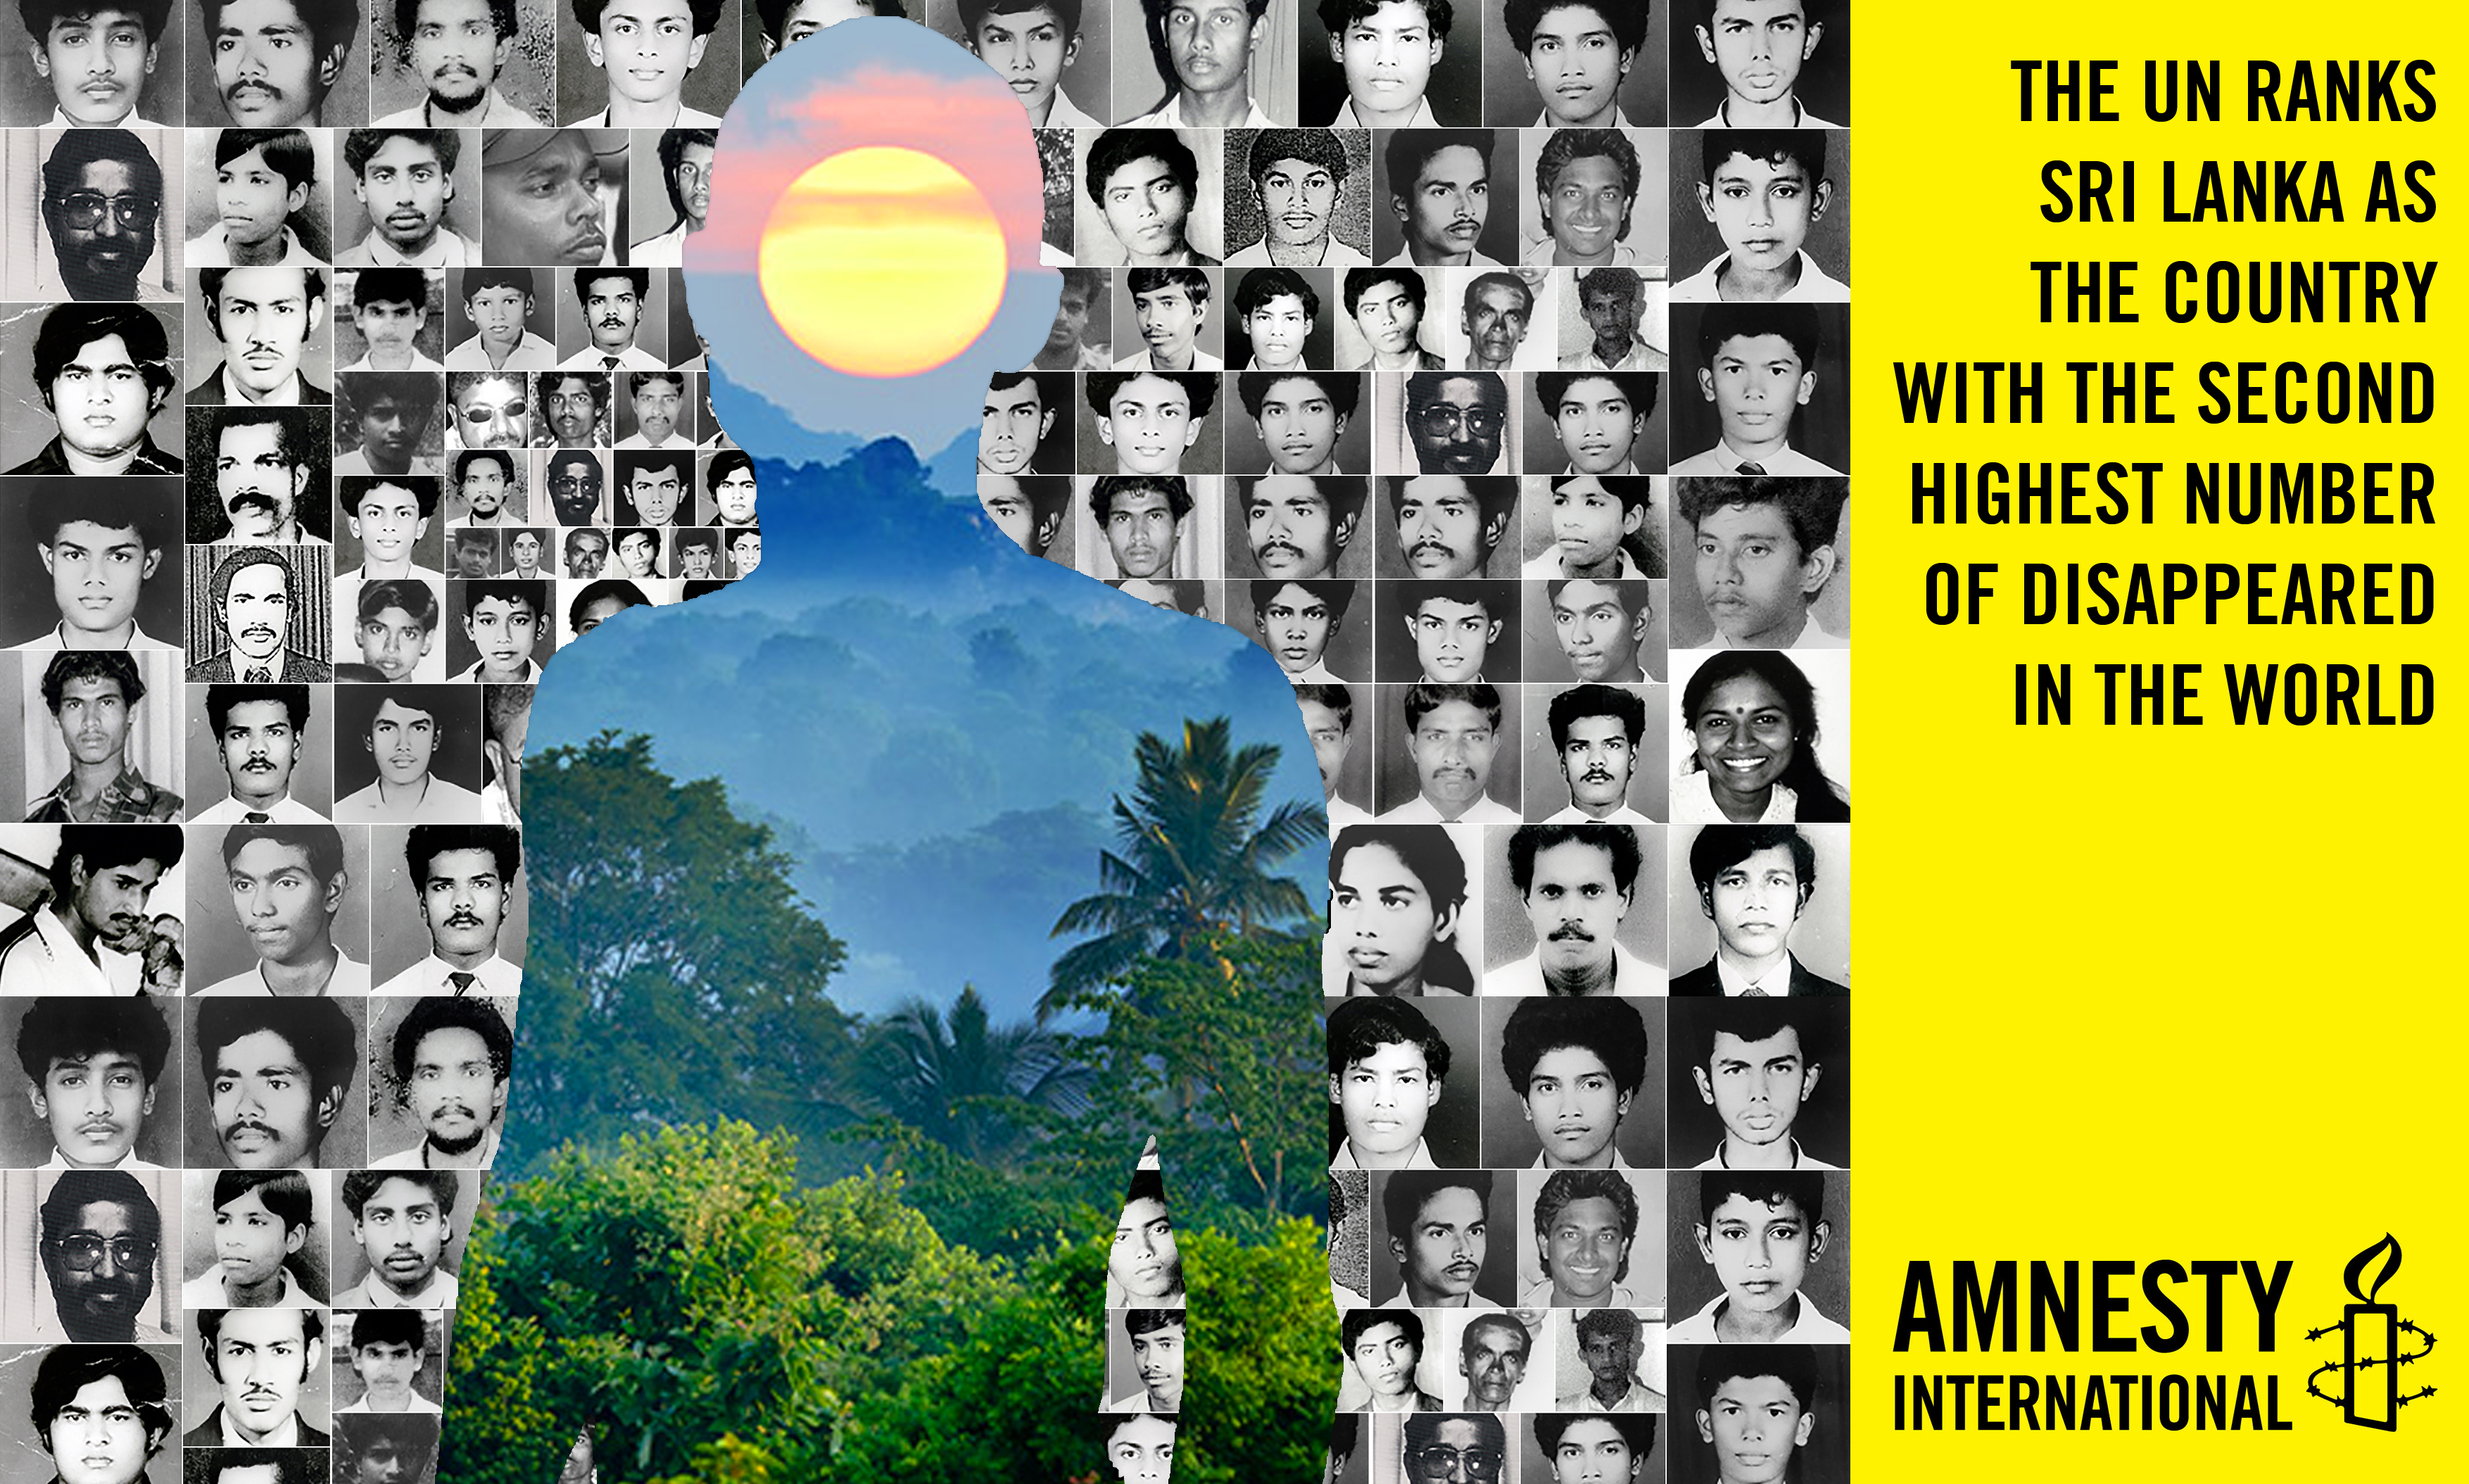 Images produced to highlight disappearances in Sri Lanka over the past 30 years.  Produced to coincide with Amnesty International's "Silenced Shadows”, a poetry competition on disappearances in Sri Lanka. Full details: http://join.amnesty.org//ea-campaign/action.retrievestaticpage.do?ea_static_page_id=4326 Text reads: The UN ranks Sri Lanka as the country with the second highest number of disappeared in the world.